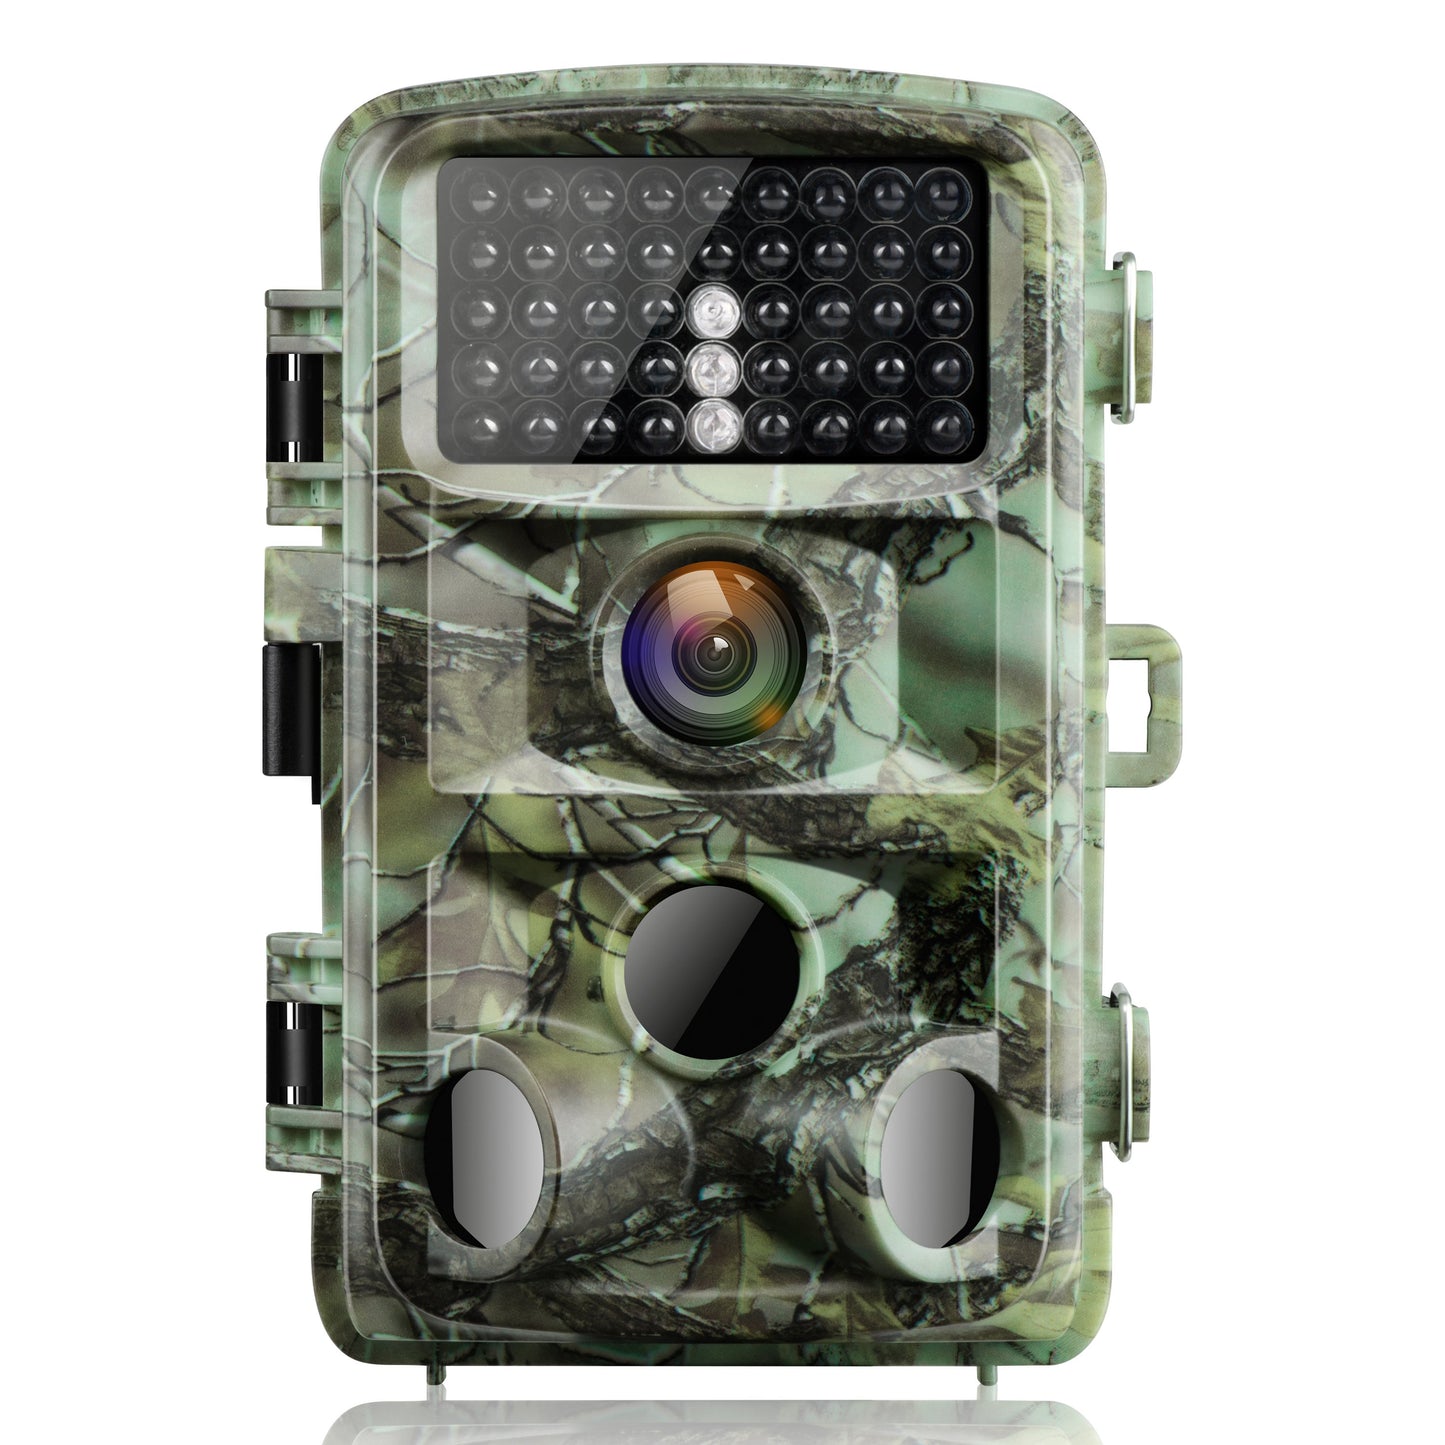 Campark T45A-GREEN Trail Camera 16MP 1080P Night Vision Waterproof Hunting Cam for Wildlife Monitoring